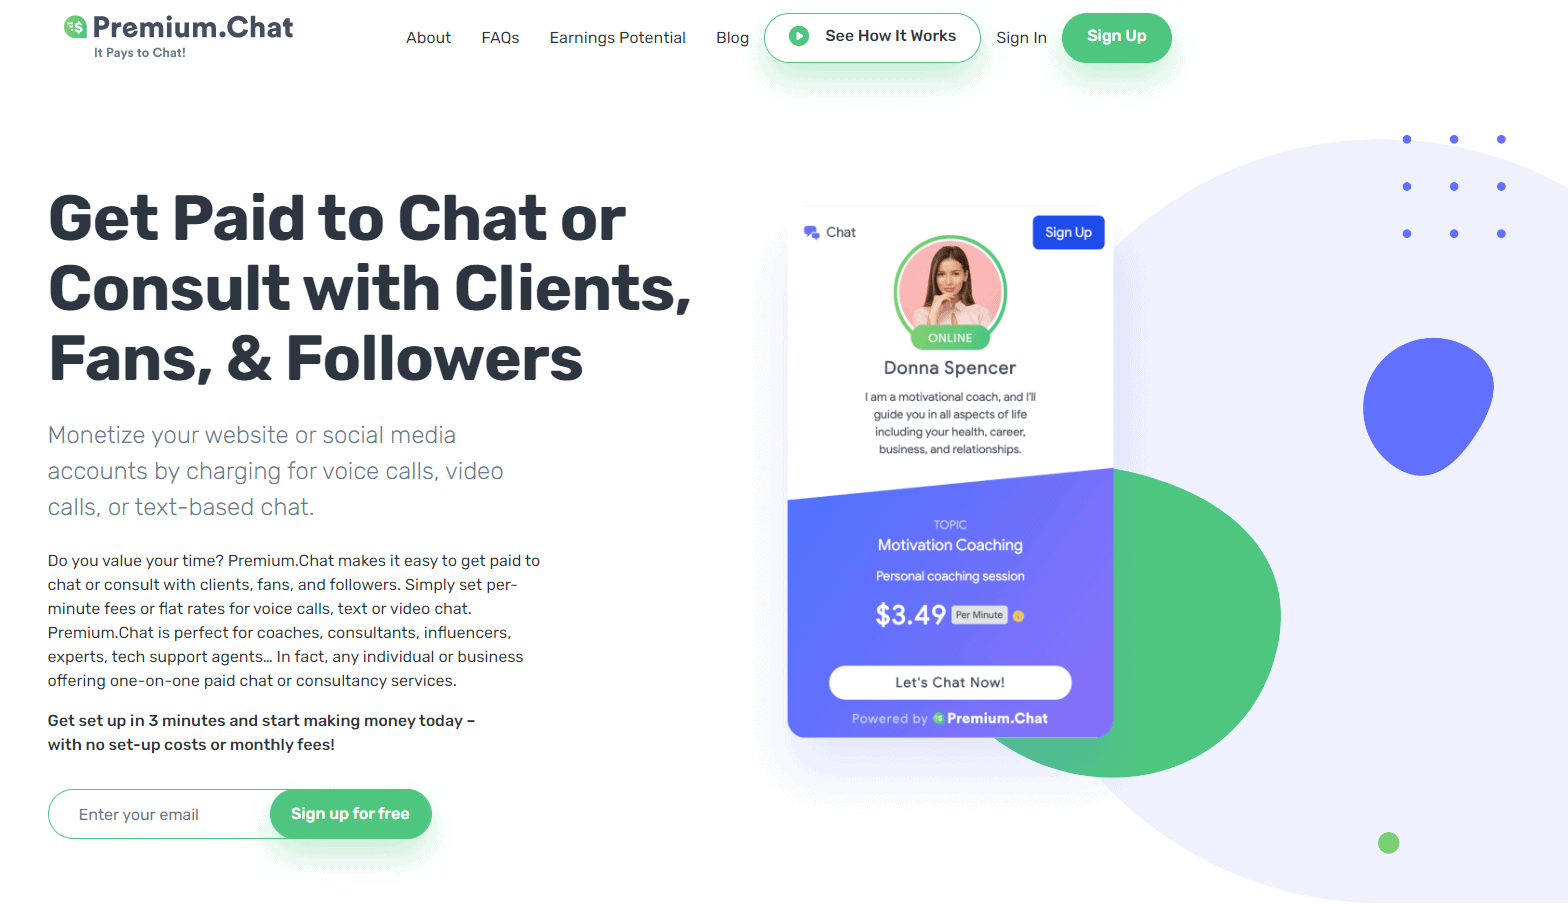 Premium.Chat - Get Paid To Text